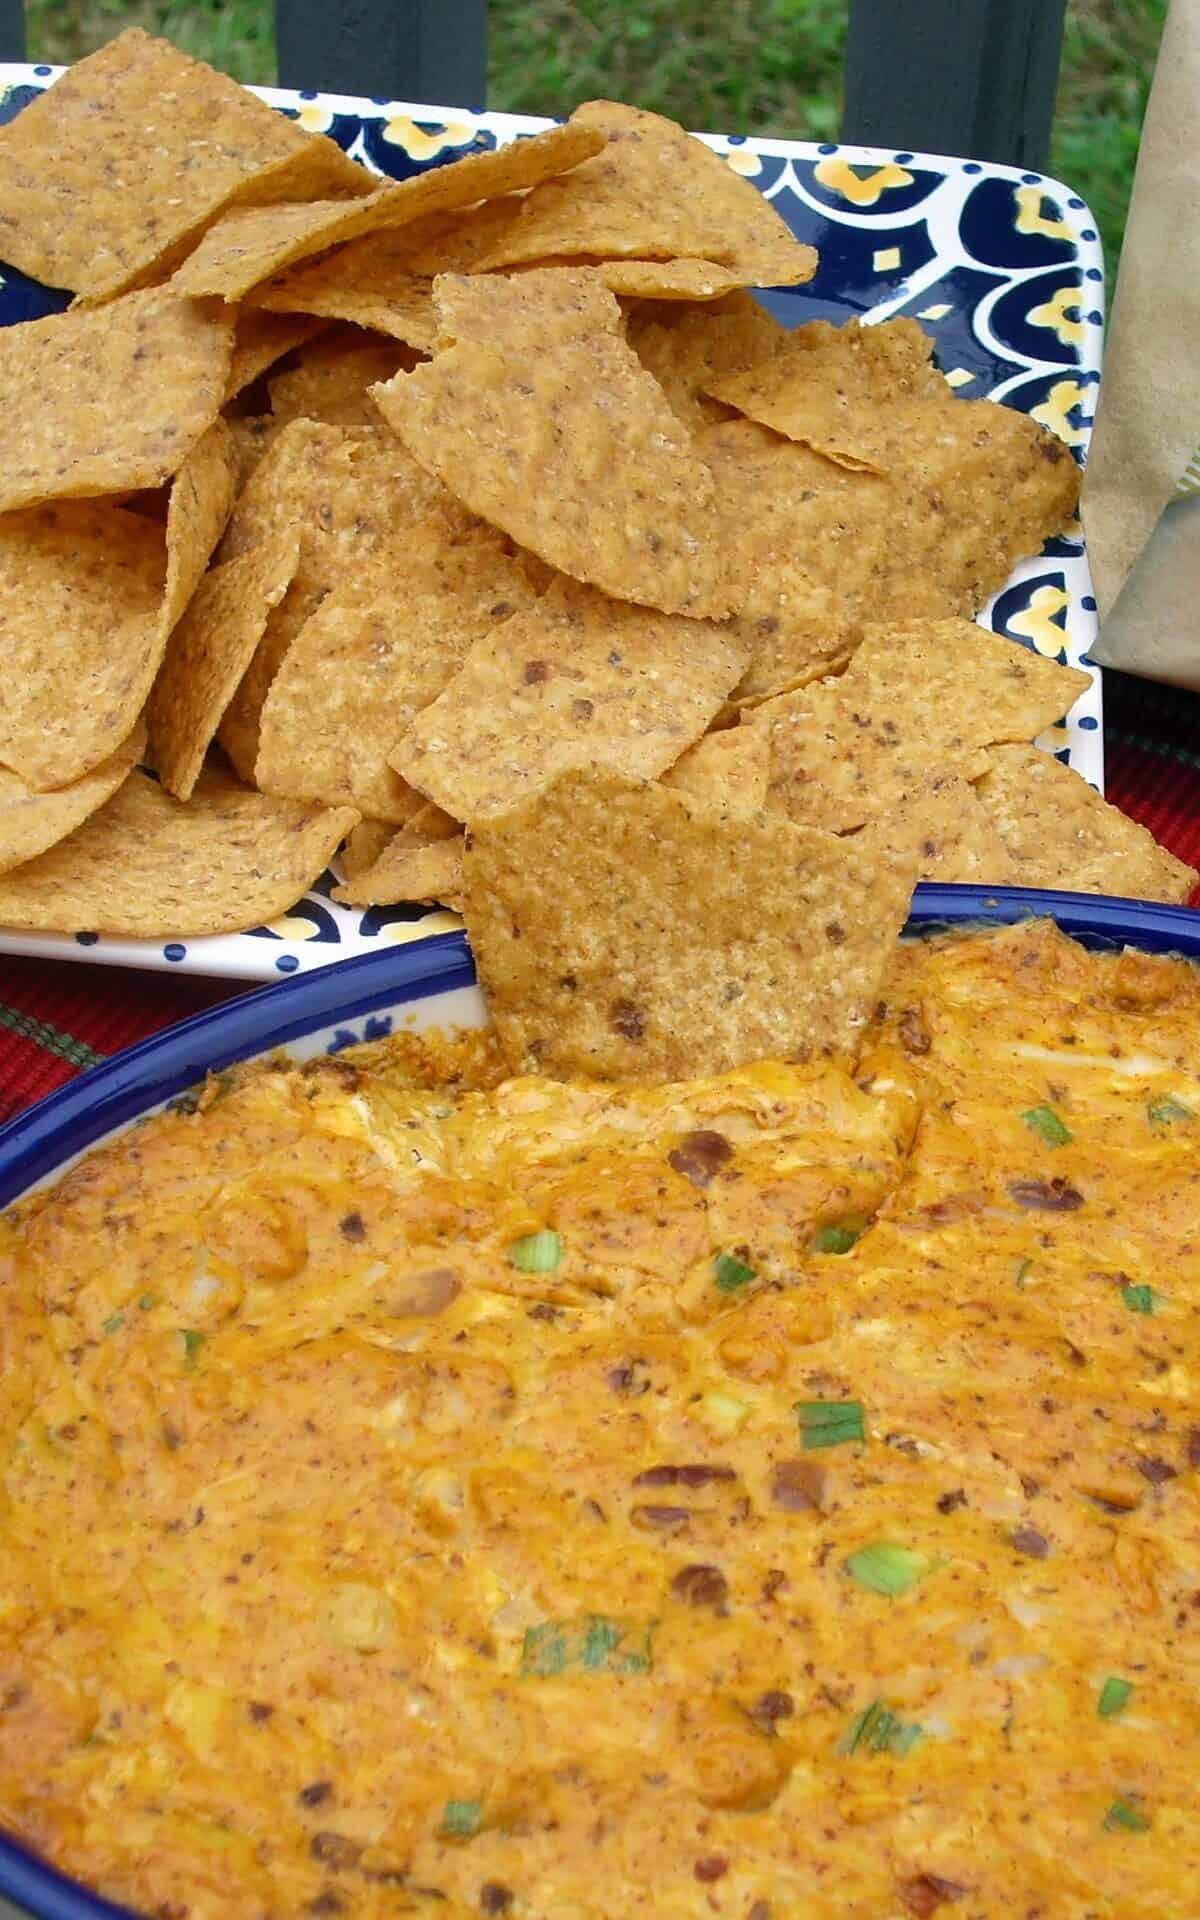  This dip is the ultimate comfort food that you won't be able to resist.